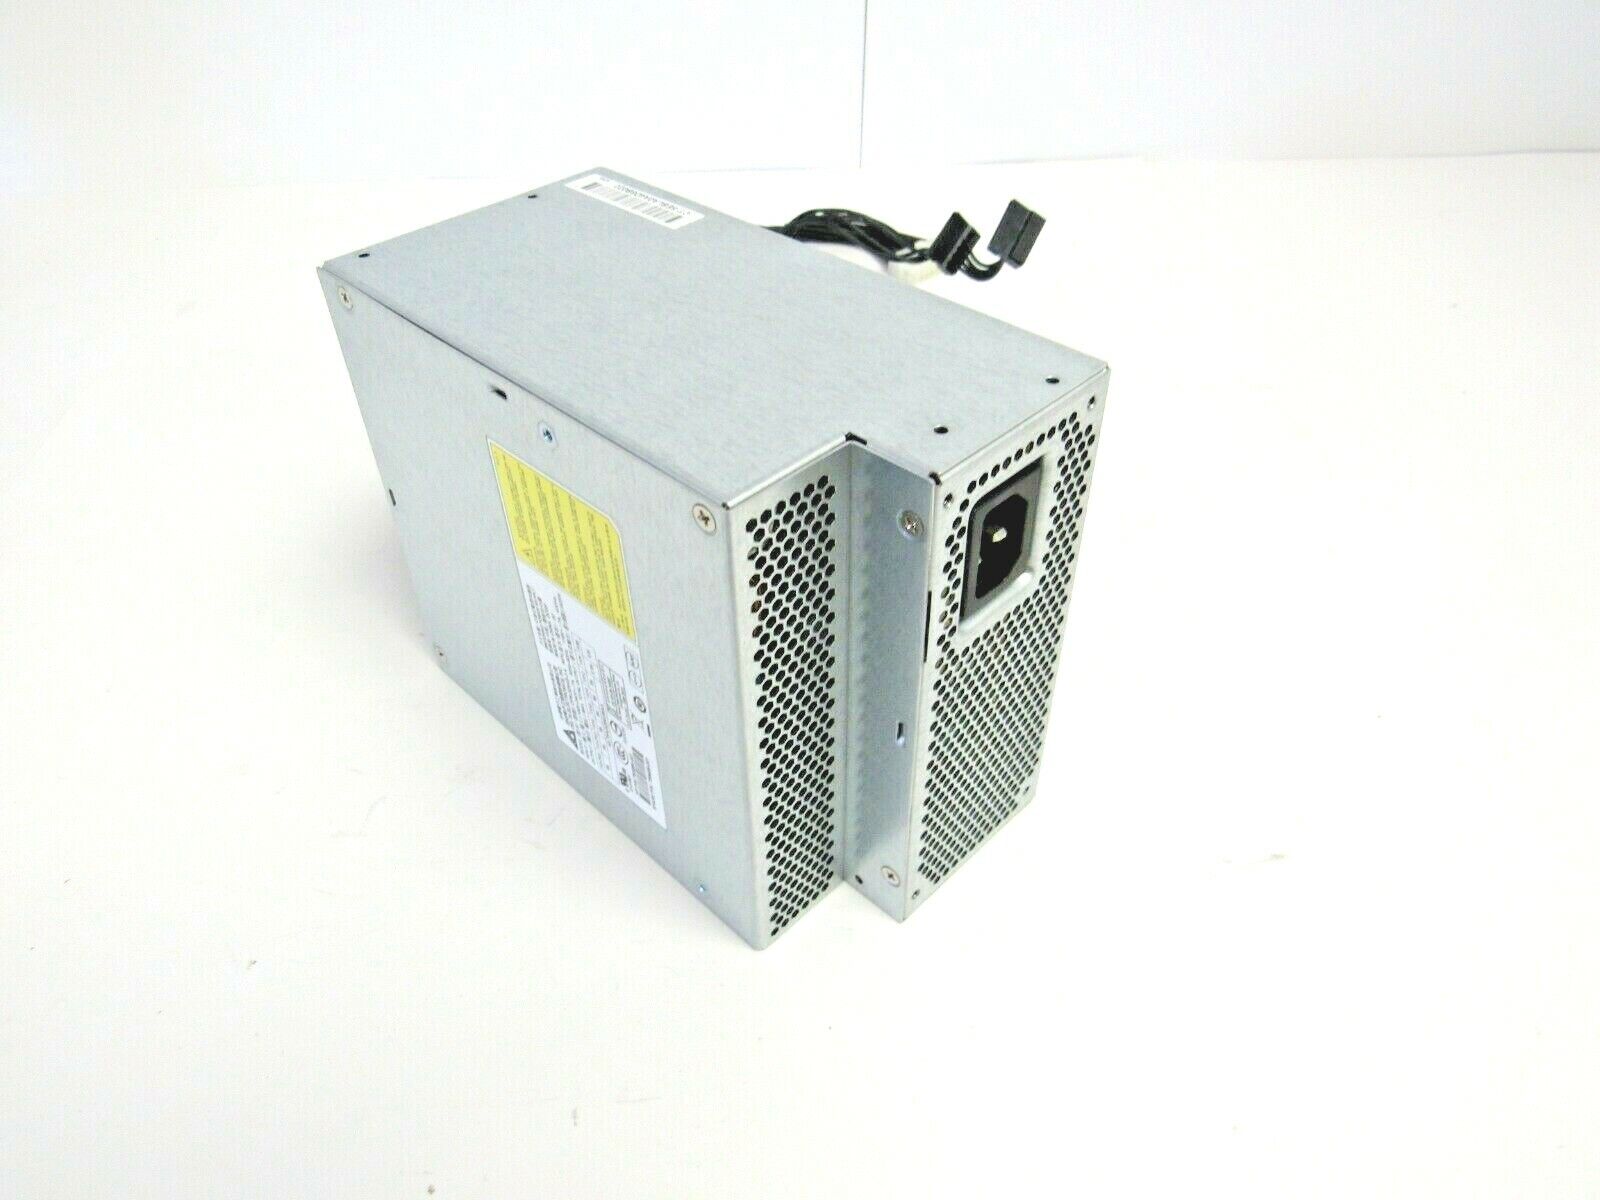 HP 758466-001 525-Watts Power Supply for Z440 Workstation DPS-525AB-3 A 72-3